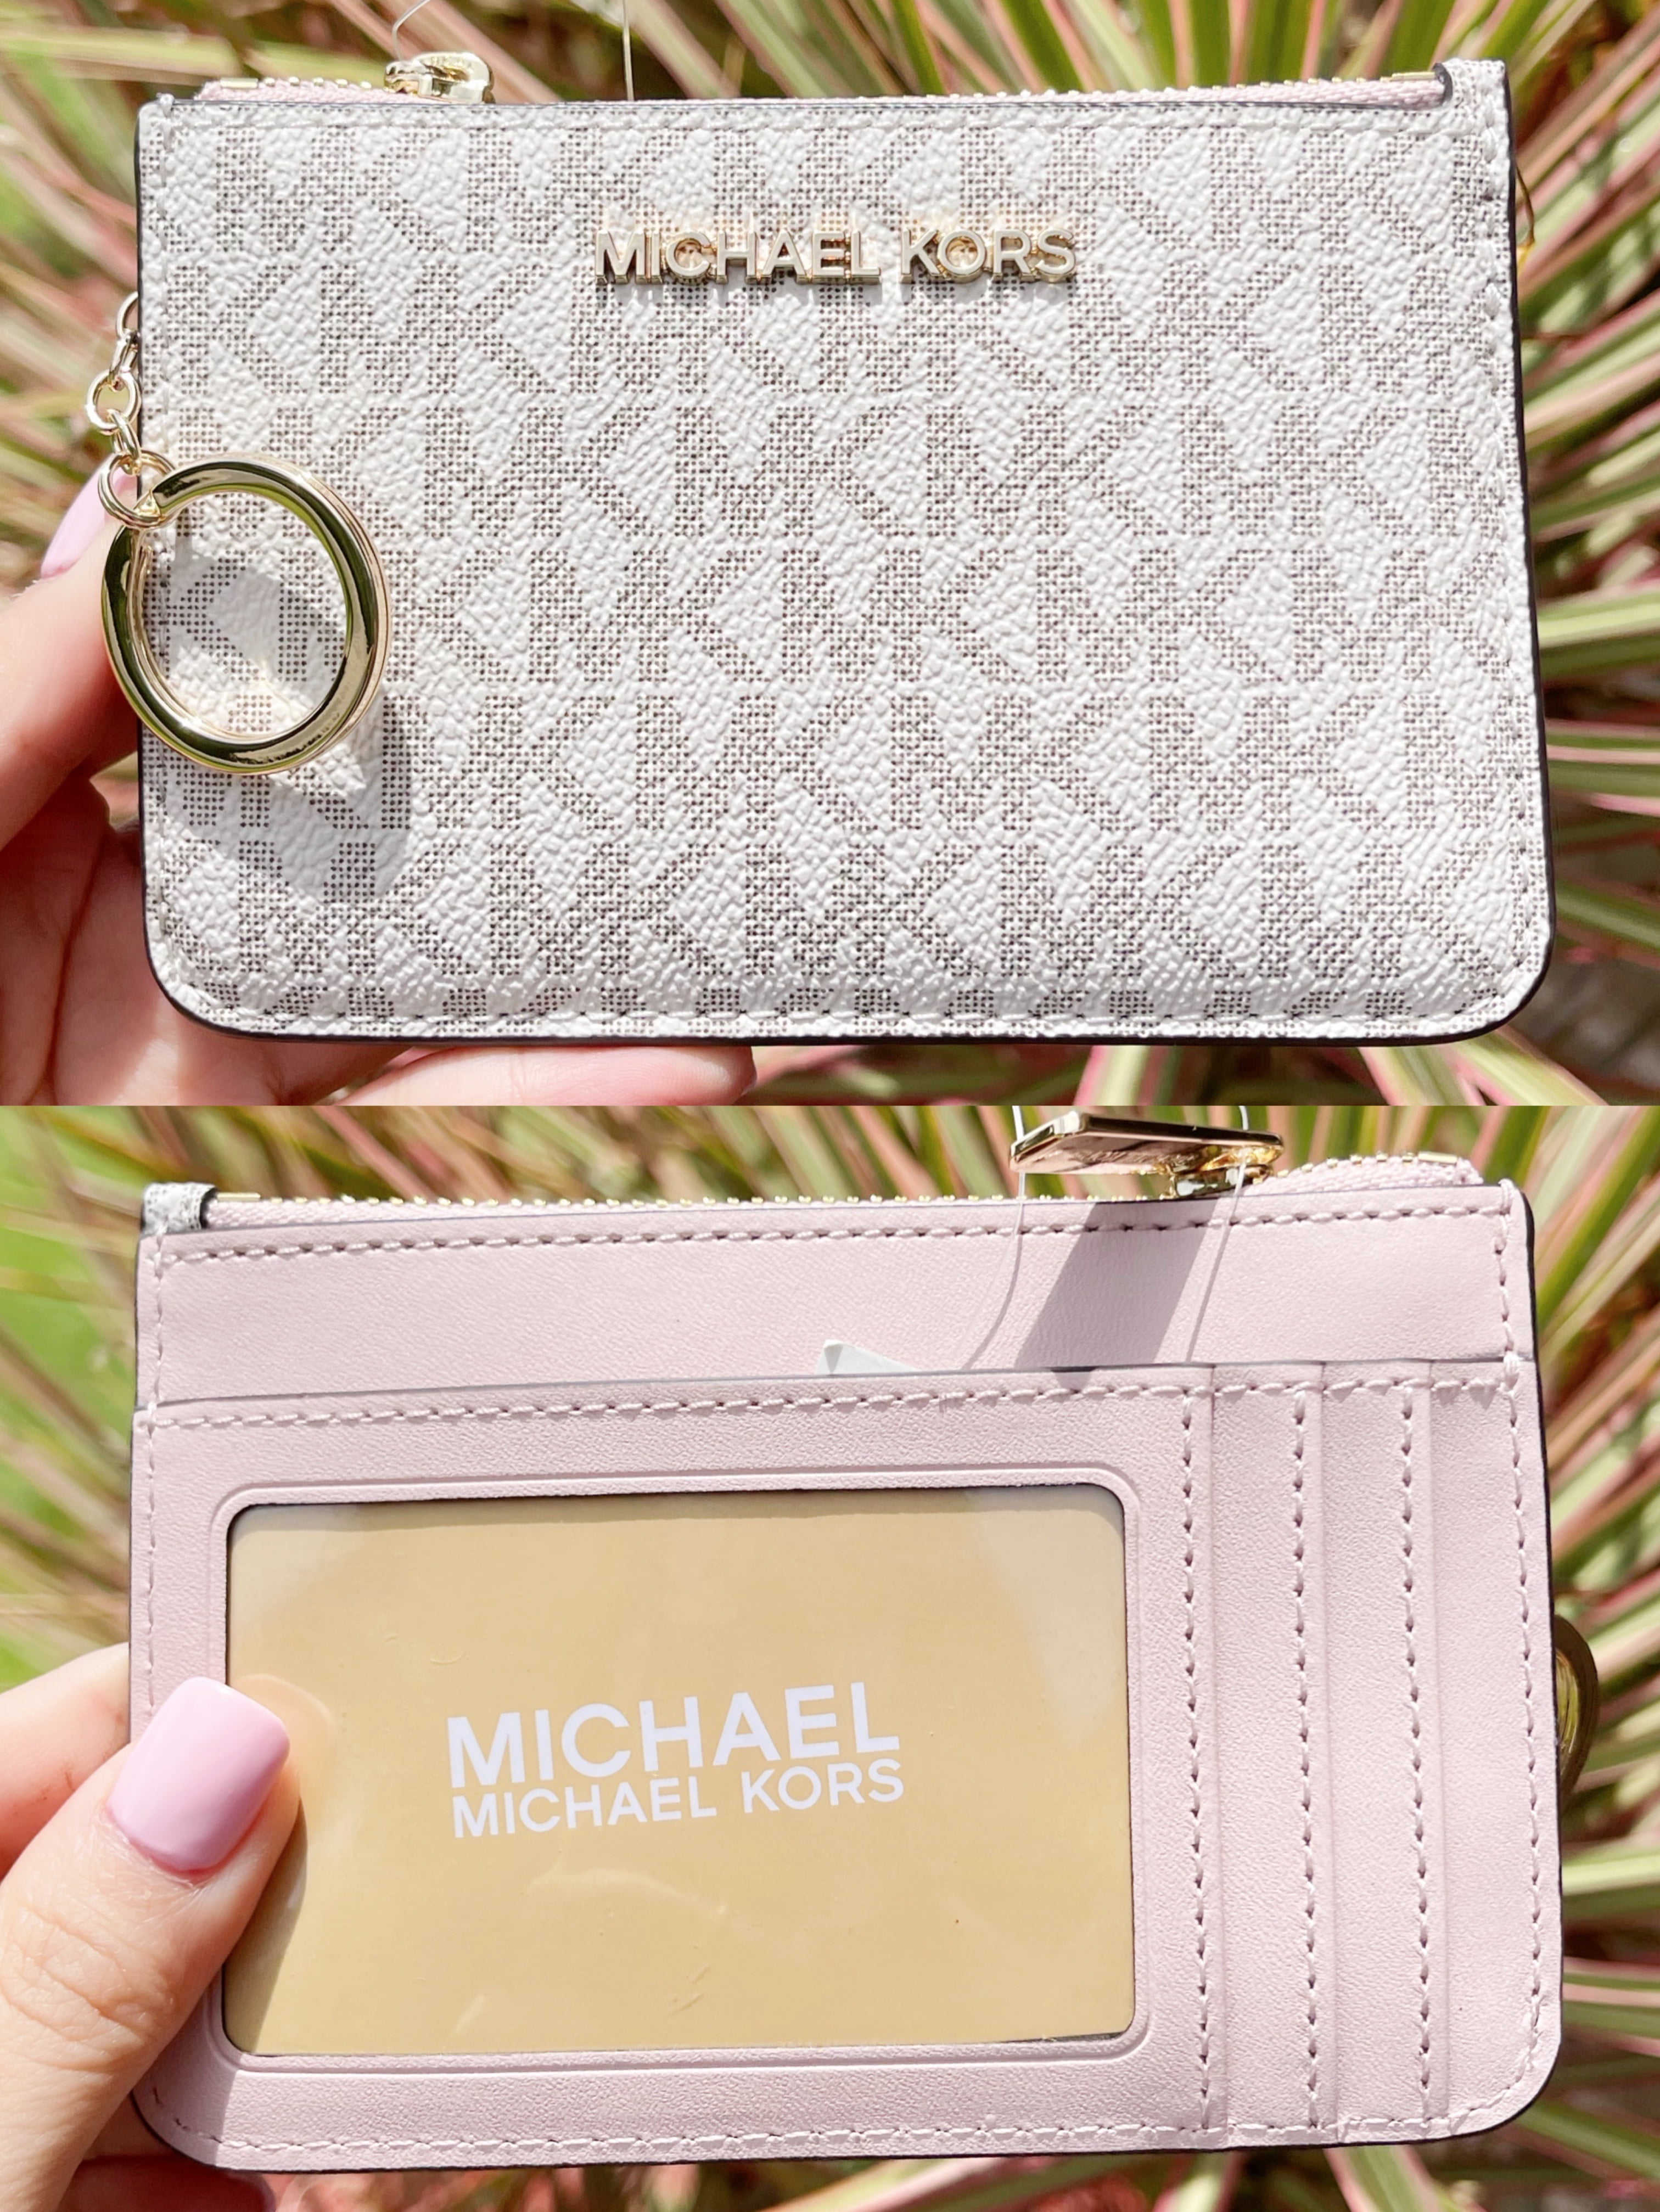 Michael Kors Key Ring Top Zip Coin Pouch Id Card Holder Vanilla Pink Wallet  … 